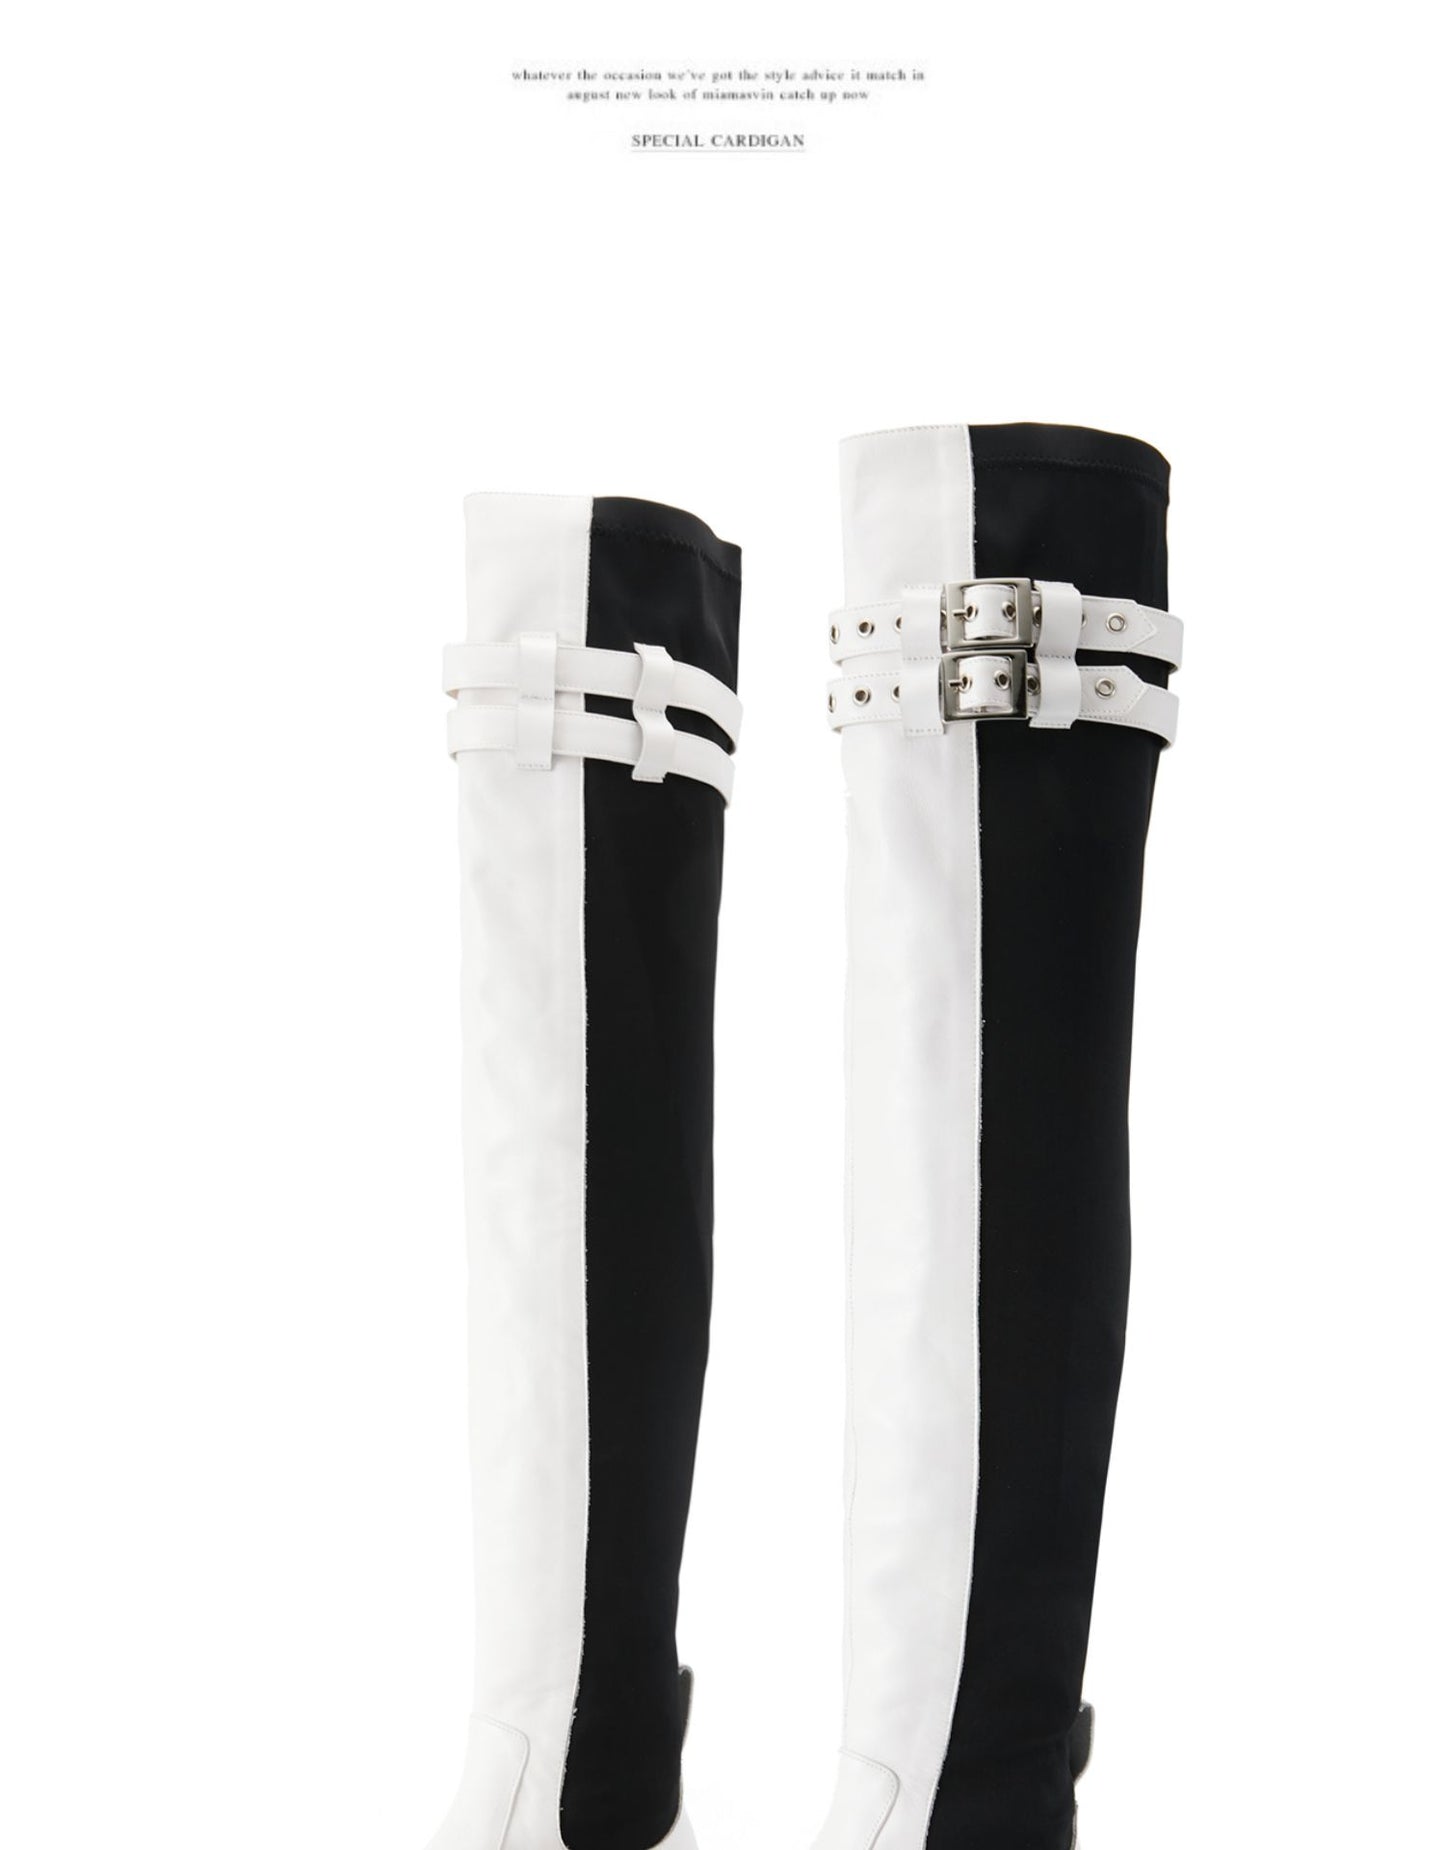 FEIFEI original niche design black and white elastic cloth cowhide over-the-knee high boots- Wila